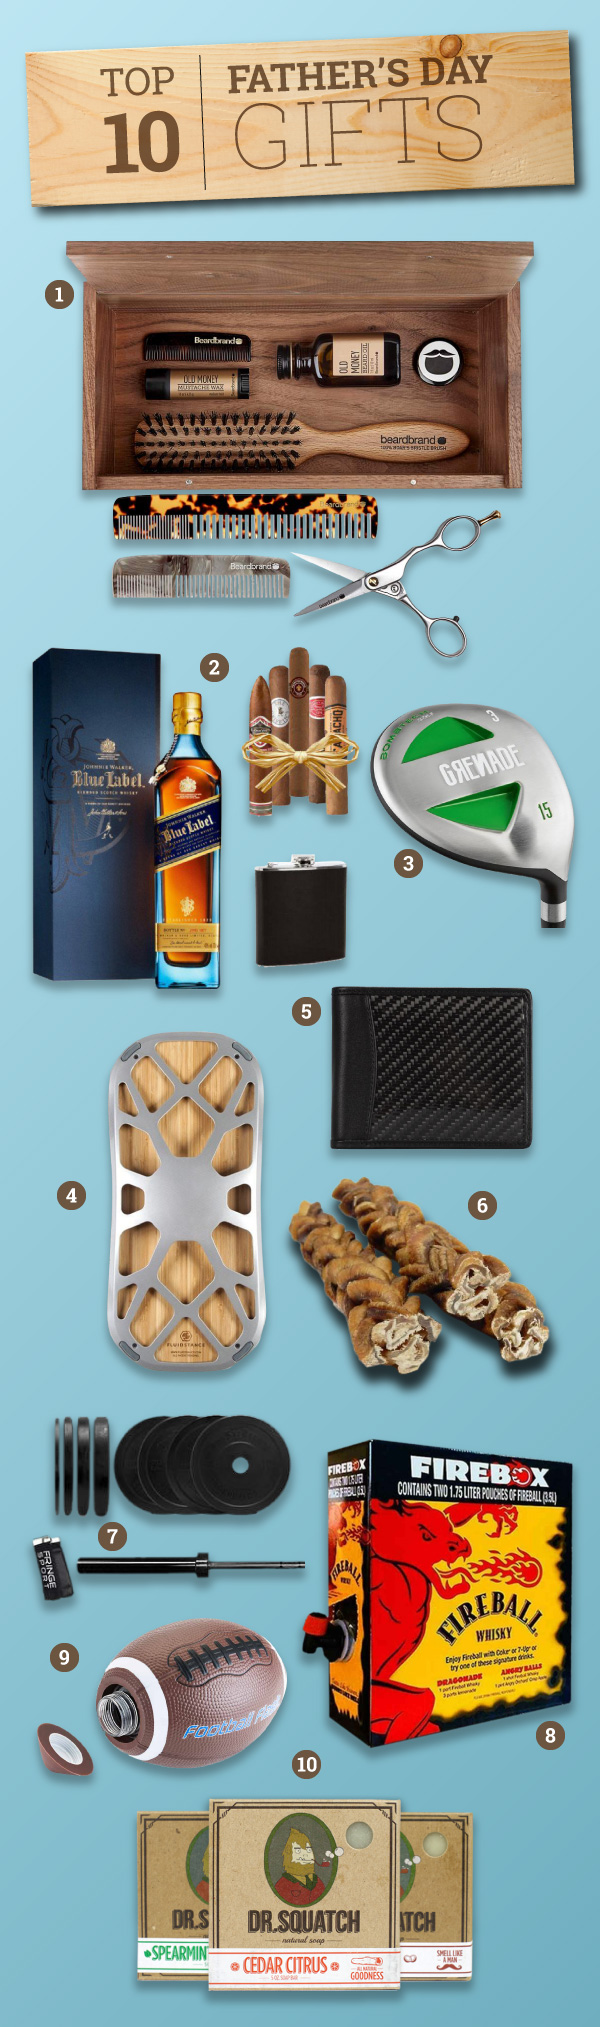 Top 10 Gifts For Father's Day